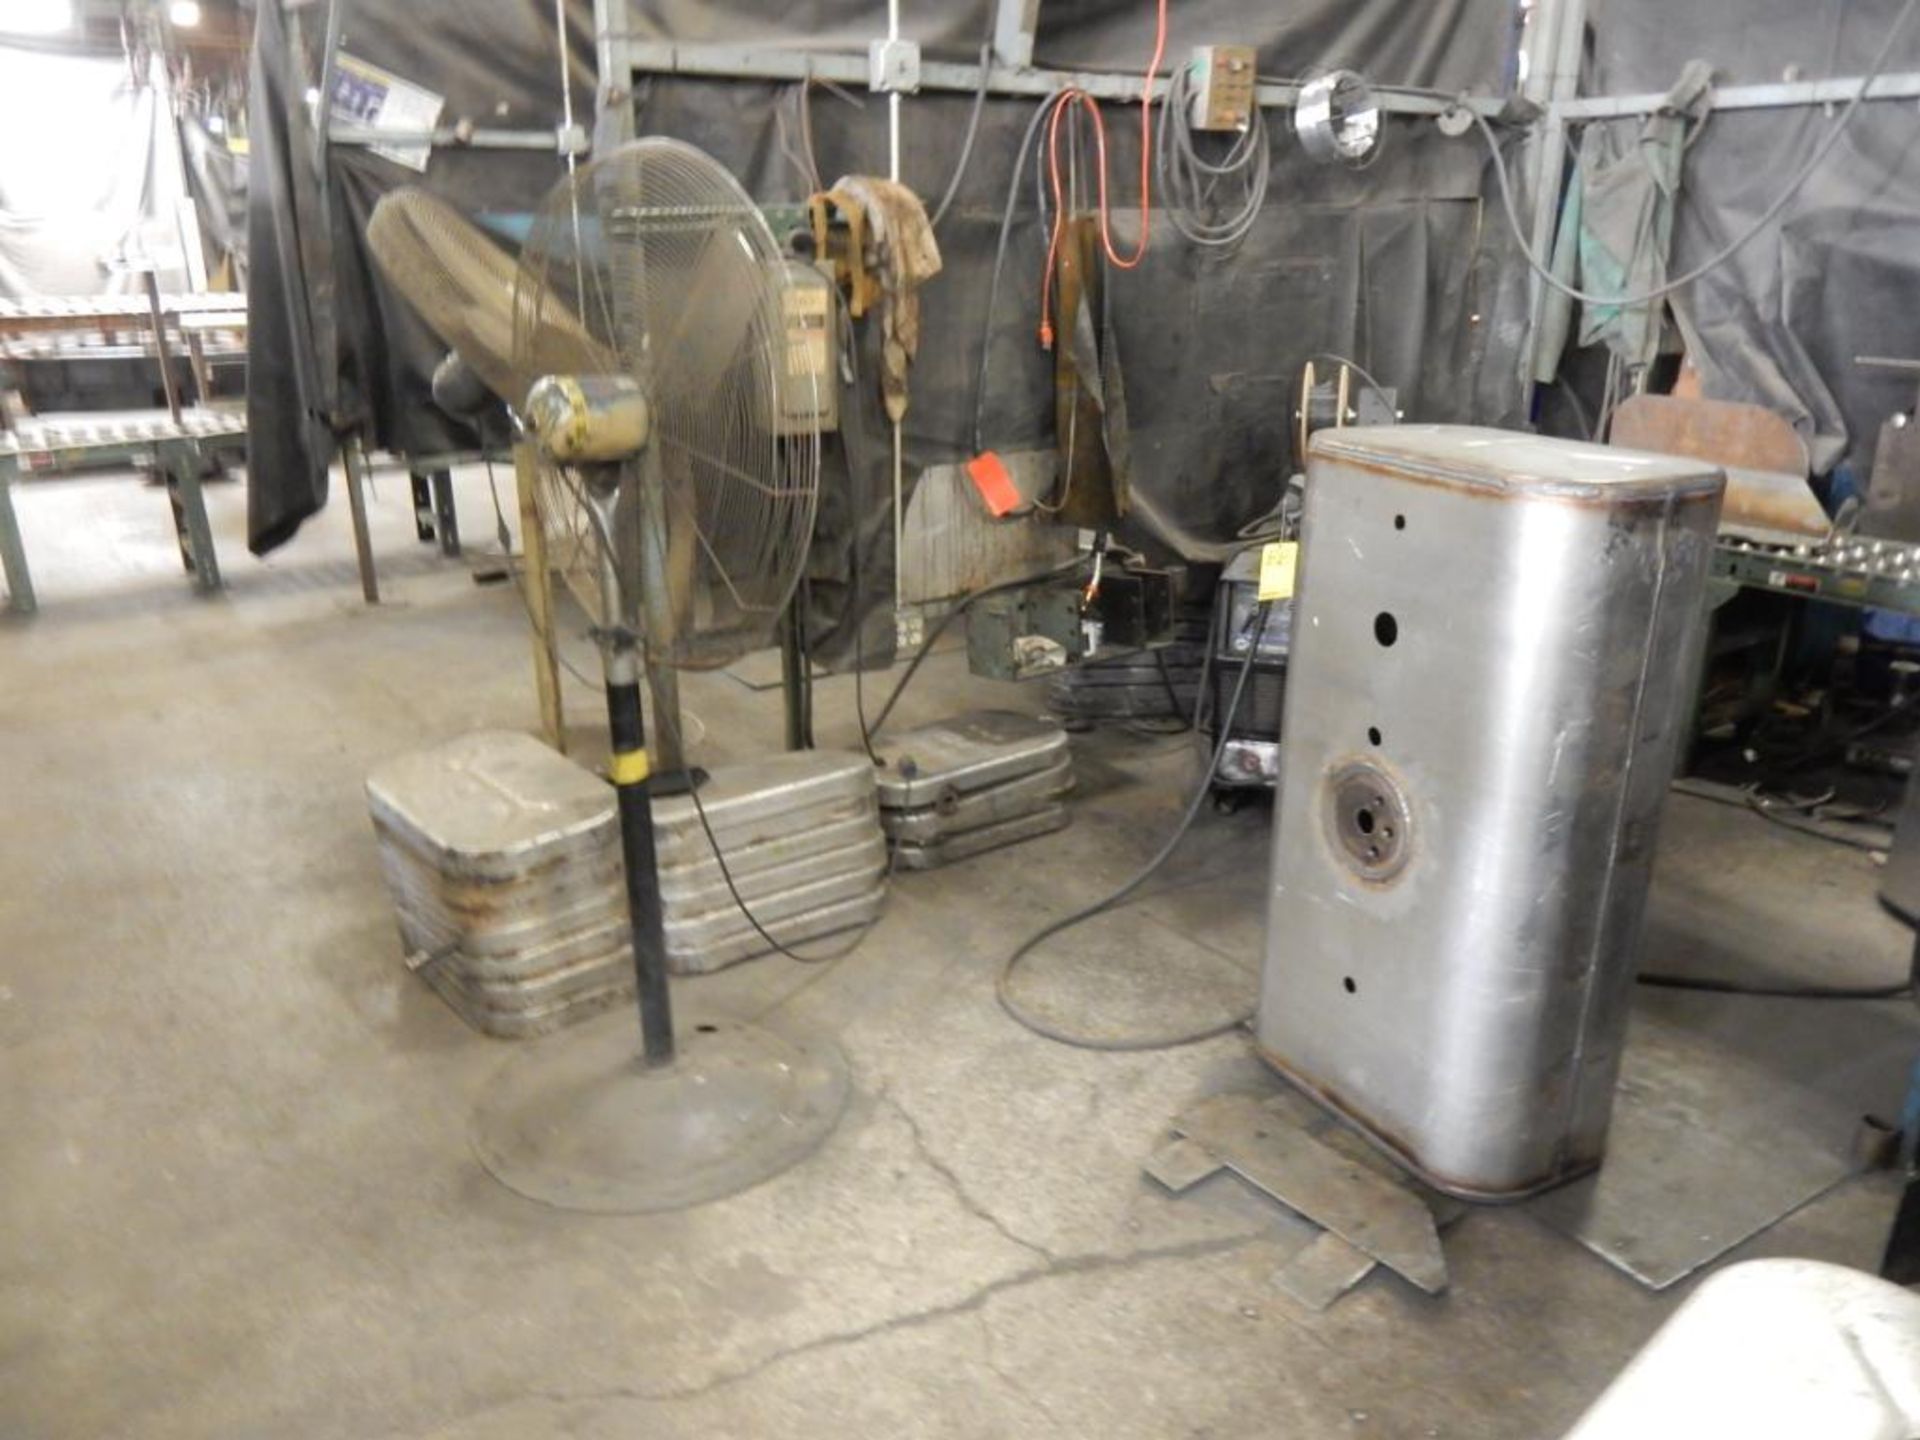 LOT MISC. ITEMS IN WELD AREA TO INCLUDE - PEDESTAL FANS, FORMAN'S DESK, MISC. TANKS, TANK PARTS, WEL - Image 2 of 4